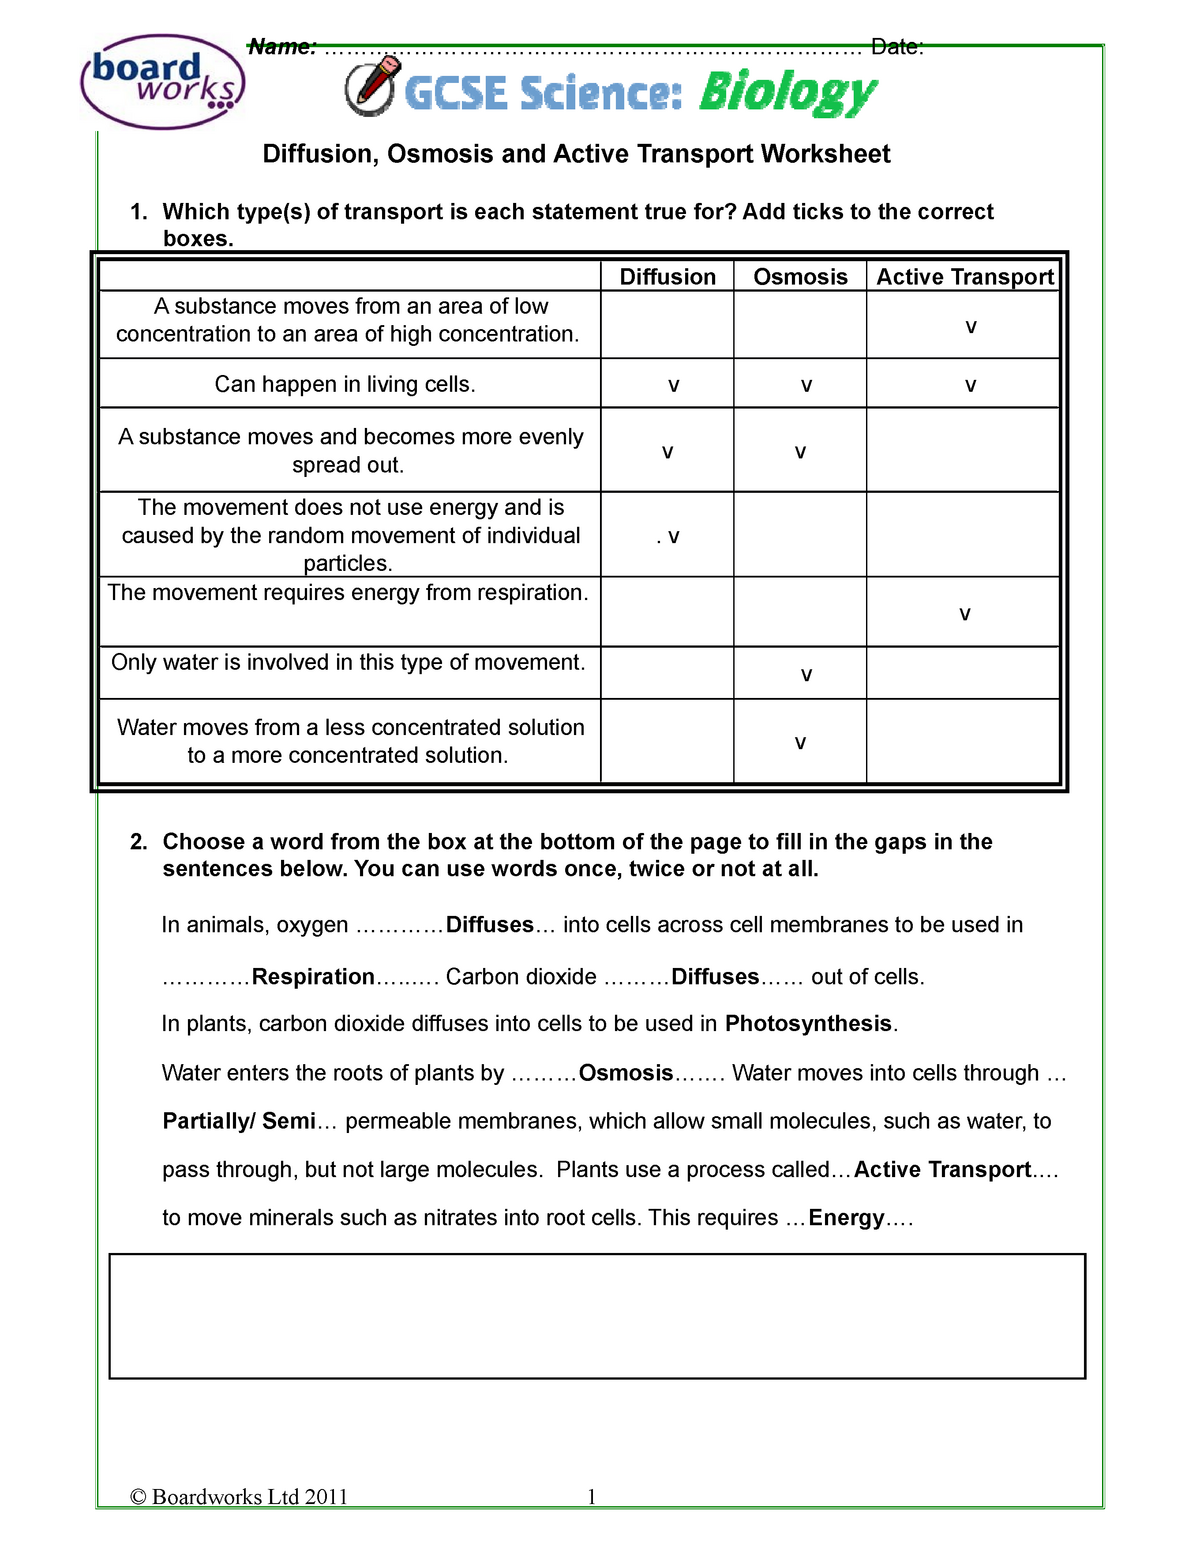 Diffusion Osmosis and Active Transport Worksheet F21 - BP 21 Pertaining To Cell Transport Worksheet Biology Answers